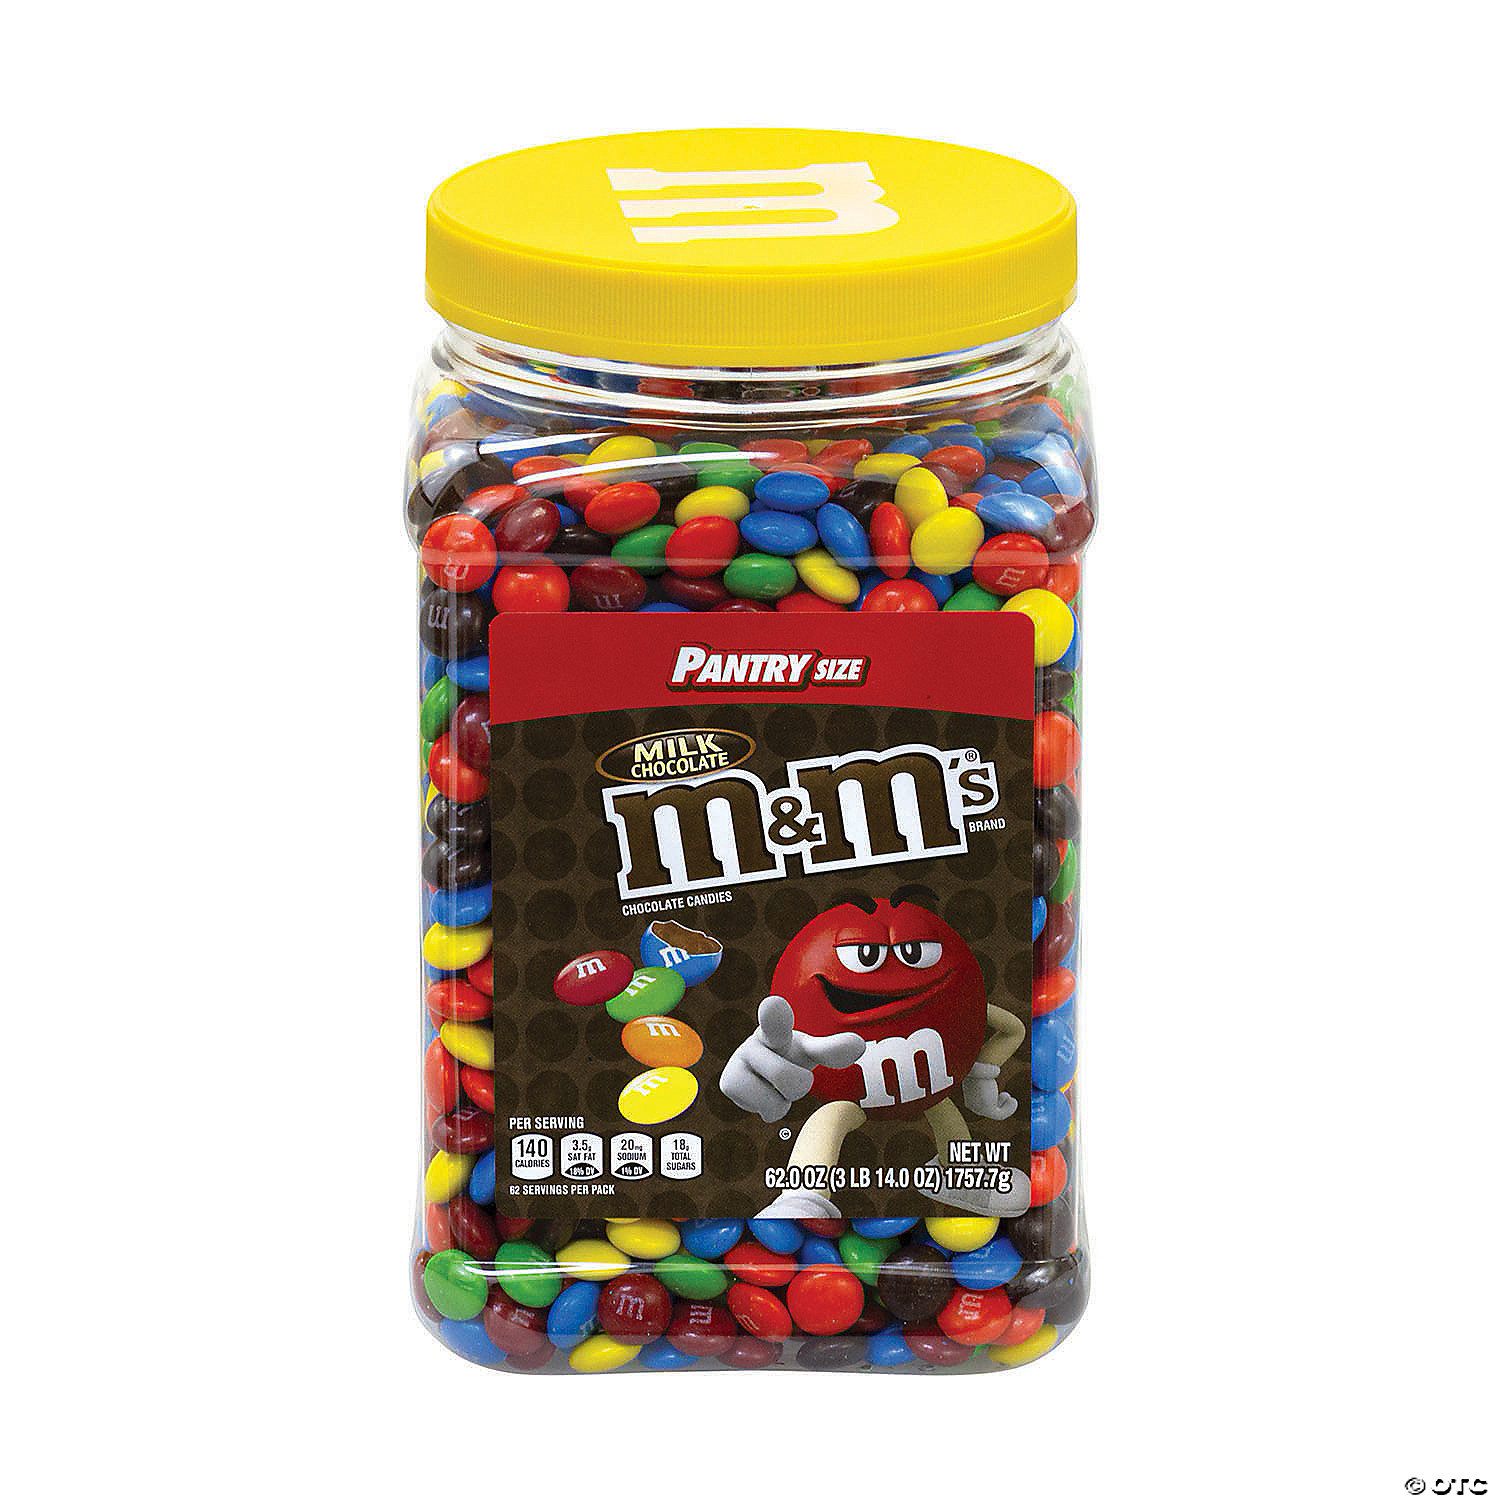 M&M's Milk Chocolate Minis Candy, 1.08-Ounce Tubes (Pack of 24)